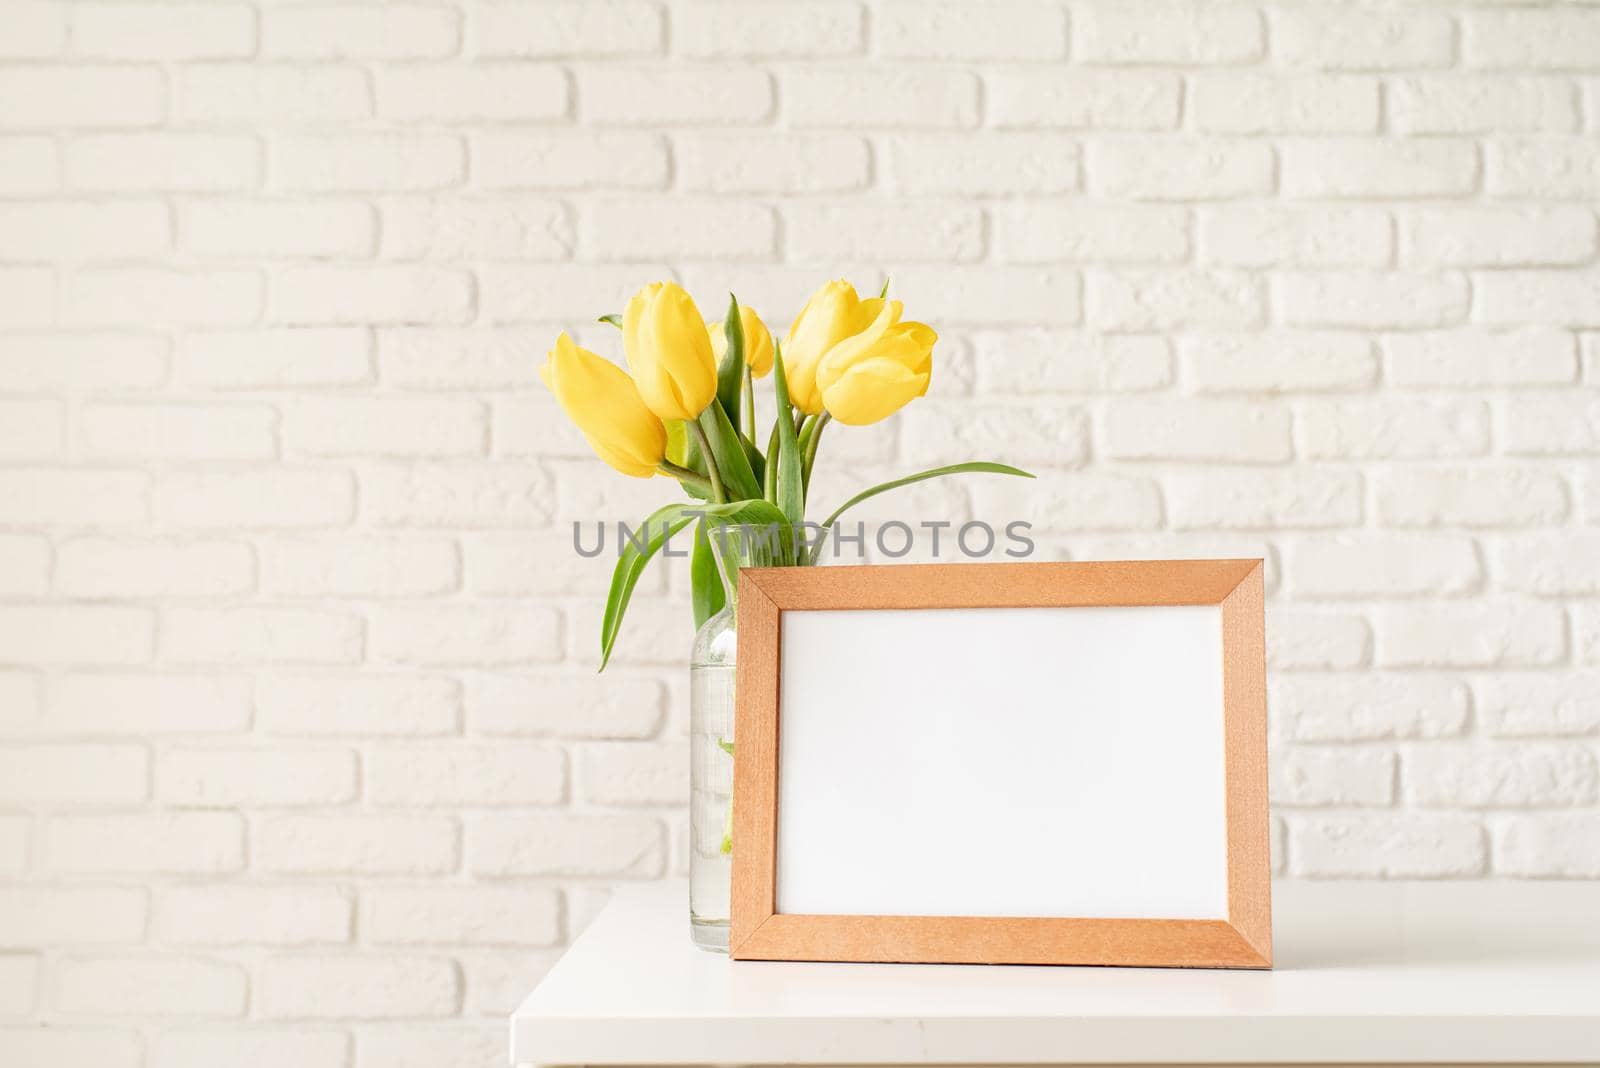 Bouquet of yellow tulips in a glass vase and blank photo frame on a white brick wall background. Mock up design